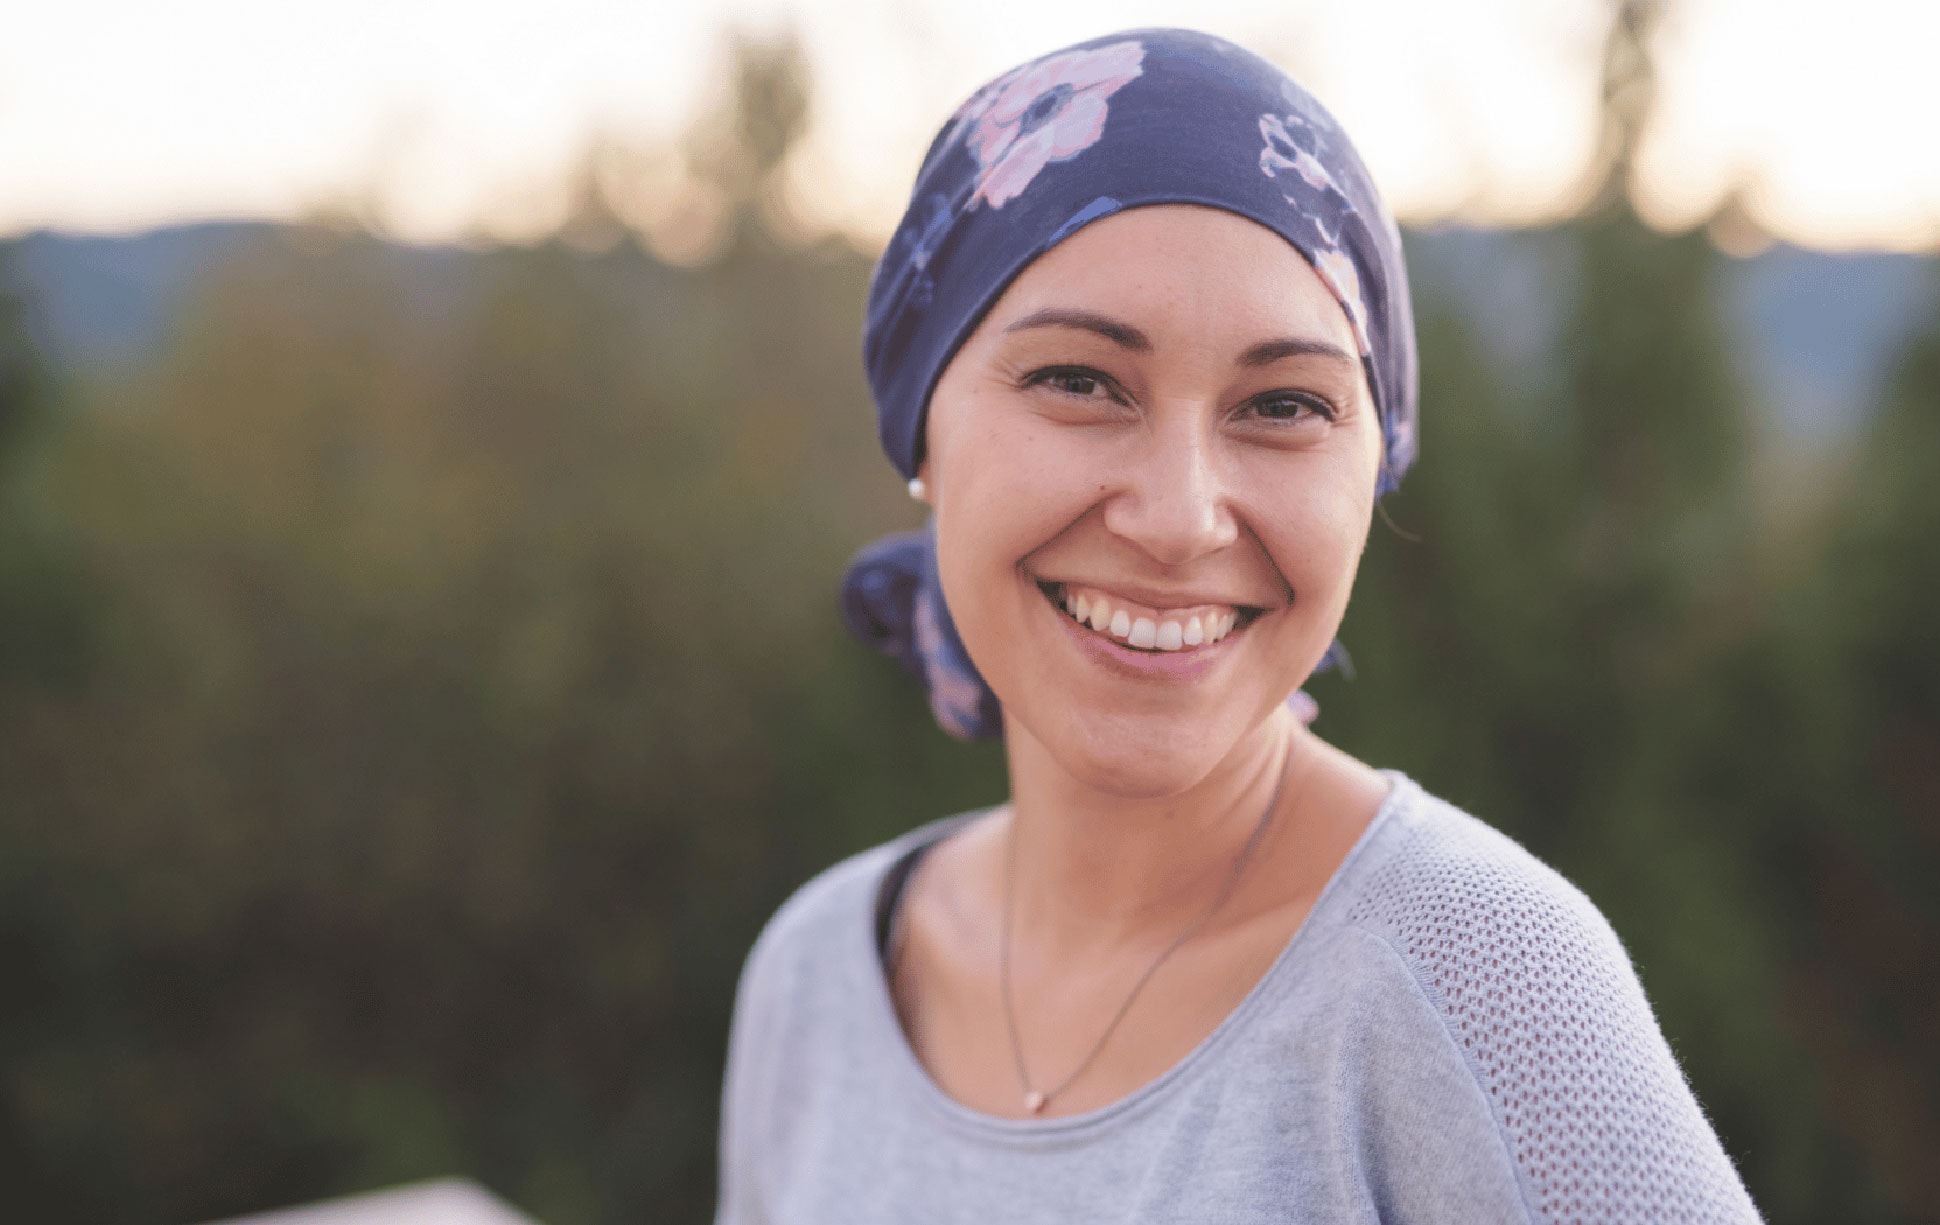 Person wearing a bandana smiling and standing in the outdoors